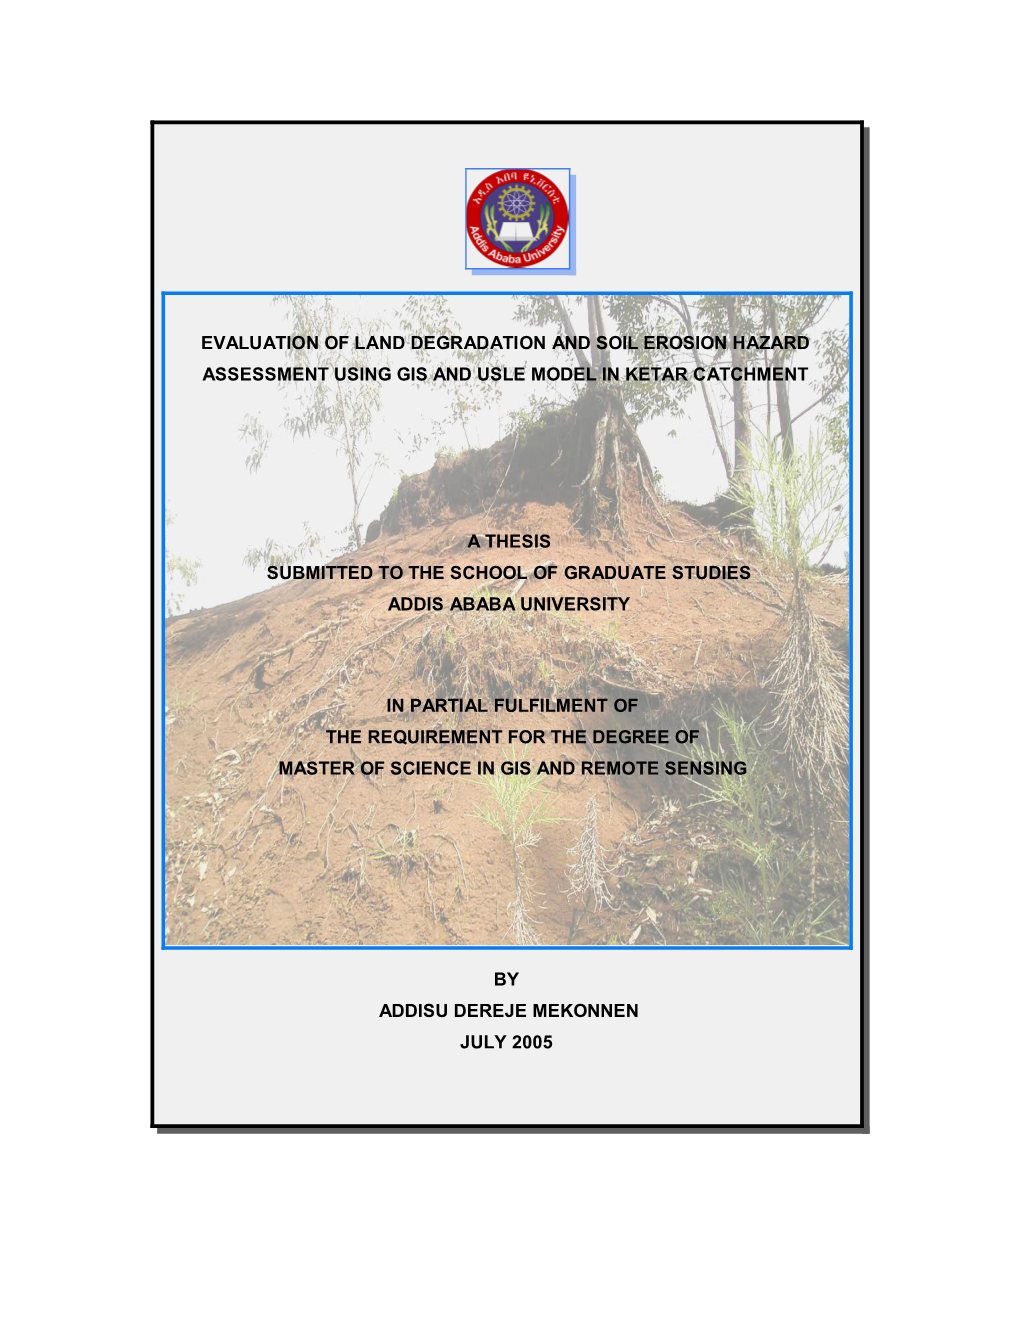 Evaluation of Land Degradation and Soil Erosion Hazard Assessment Using Gis and Usle Model in Ketar Catchment